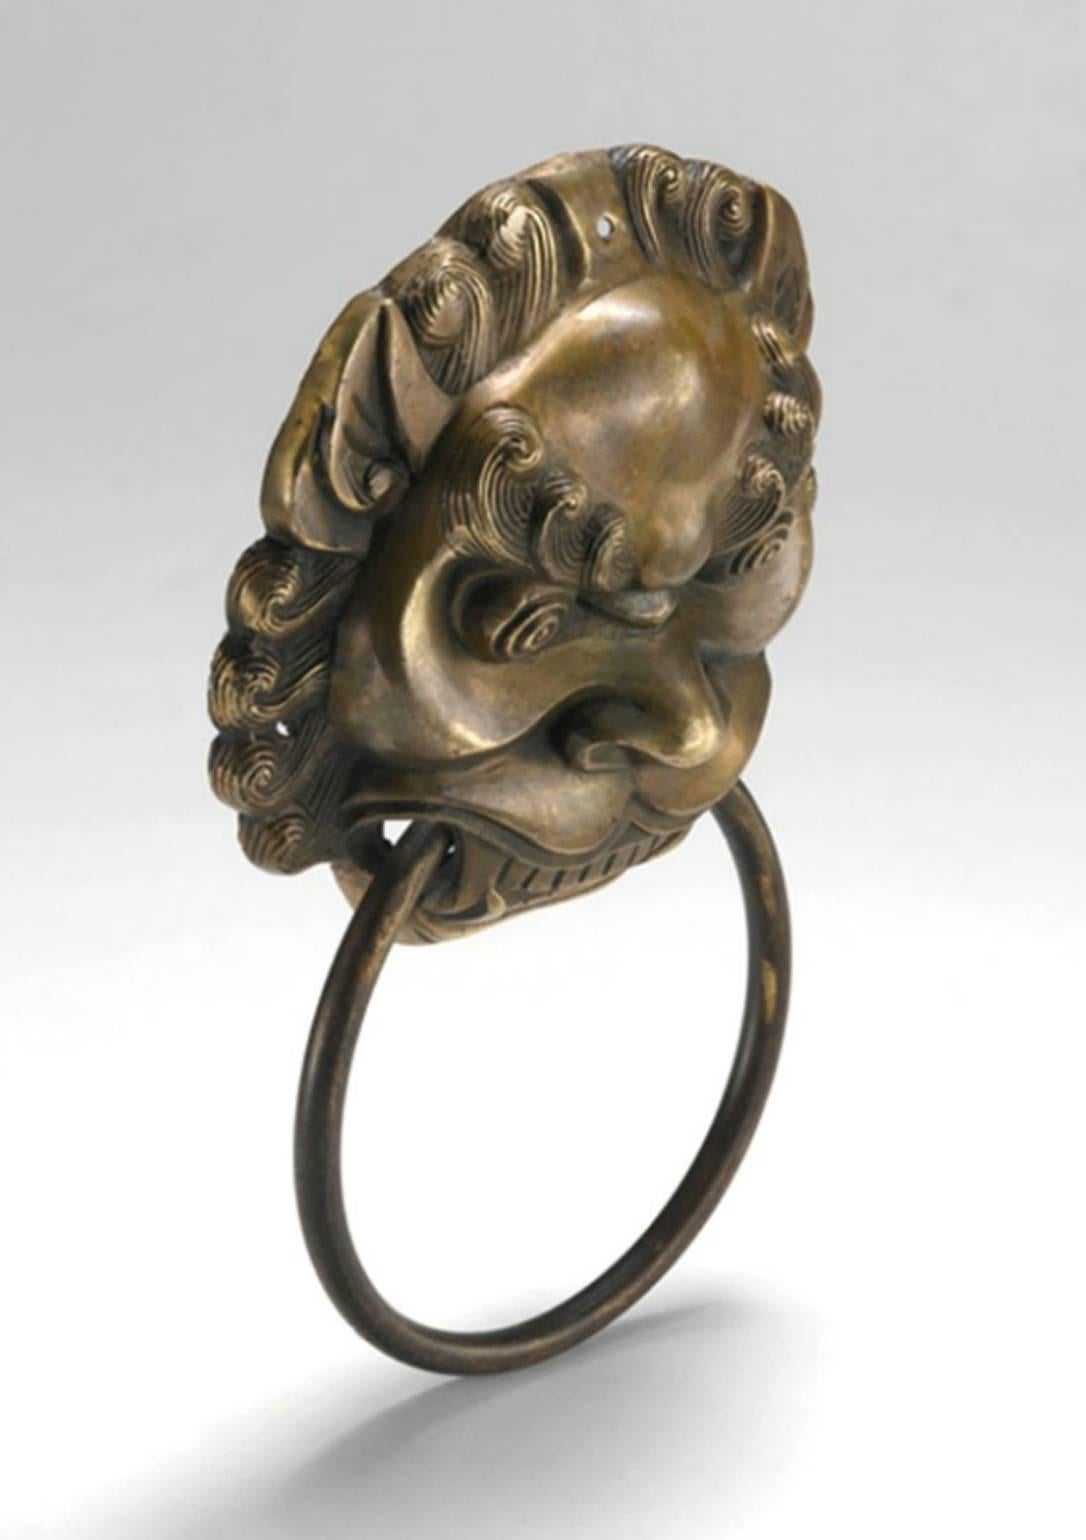 Our brass knockers can be used as door knockers or hand towel rings. Fine craftsmanship depicts the ancient mythical animals with a high level of artistic expression. The featured lions are believed to be guardians. Our knockers have an antiqued